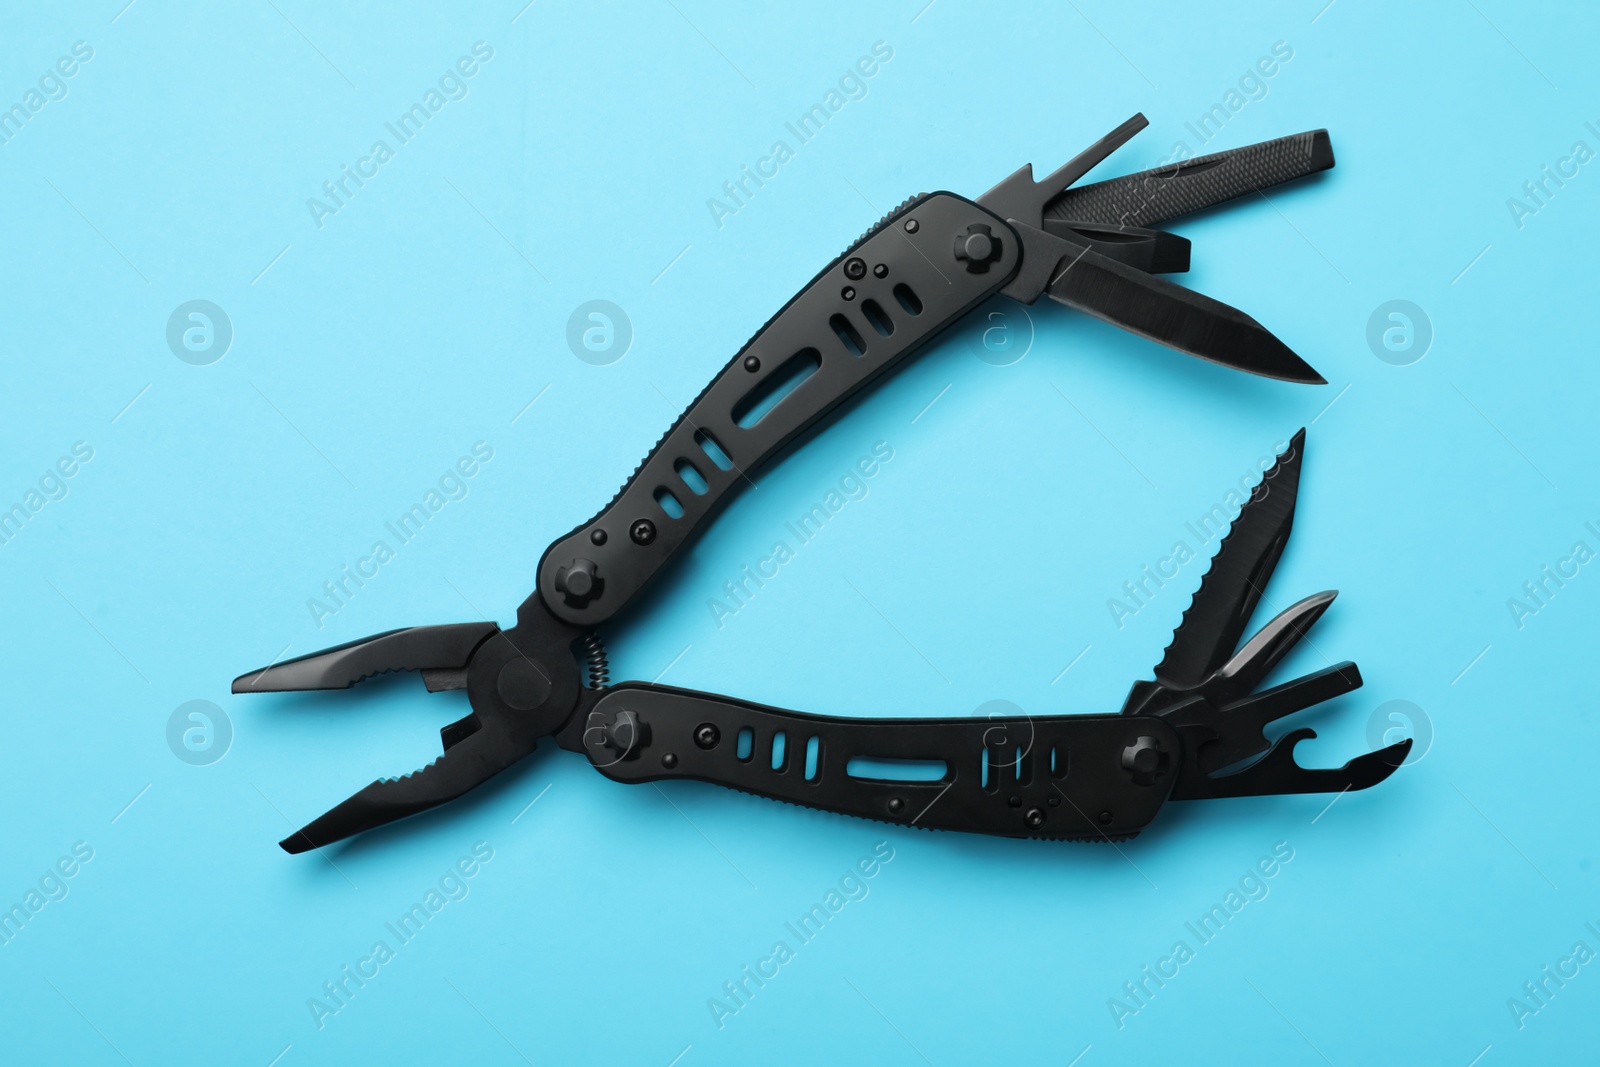 Photo of Compact portable black multitool on light blue background, top view